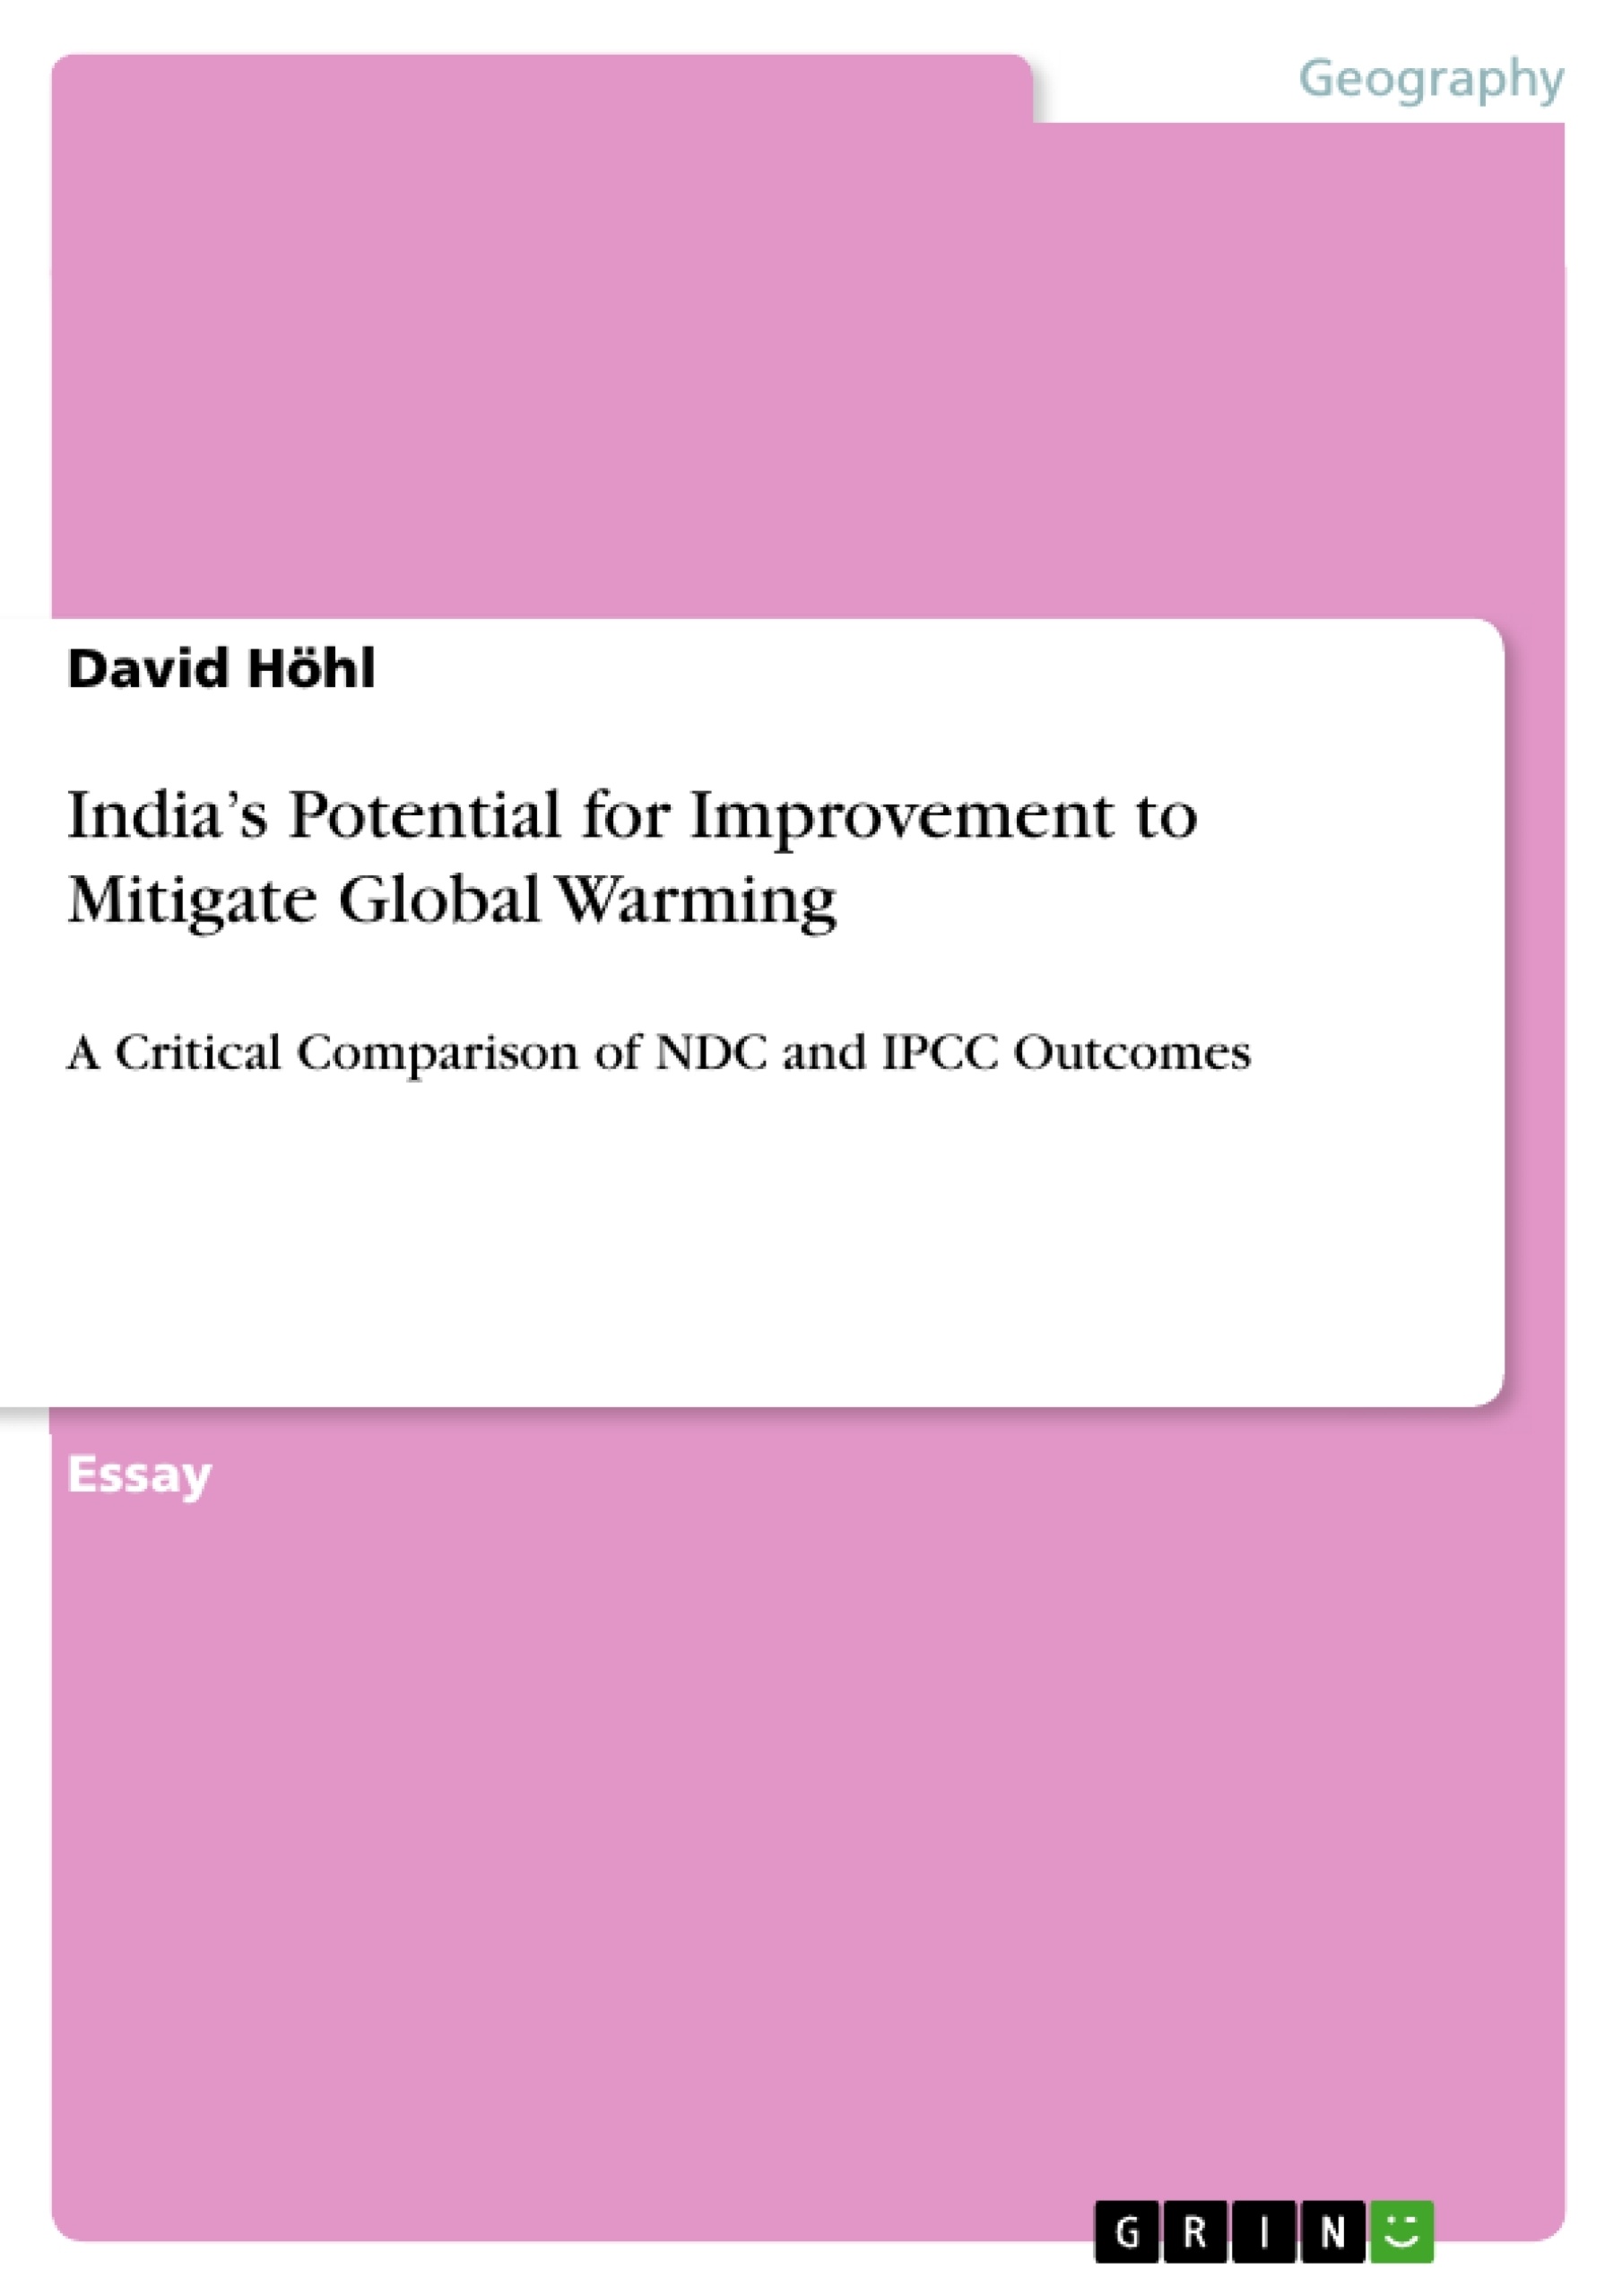 Titre: India’s Potential for Improvement to Mitigate Global Warming